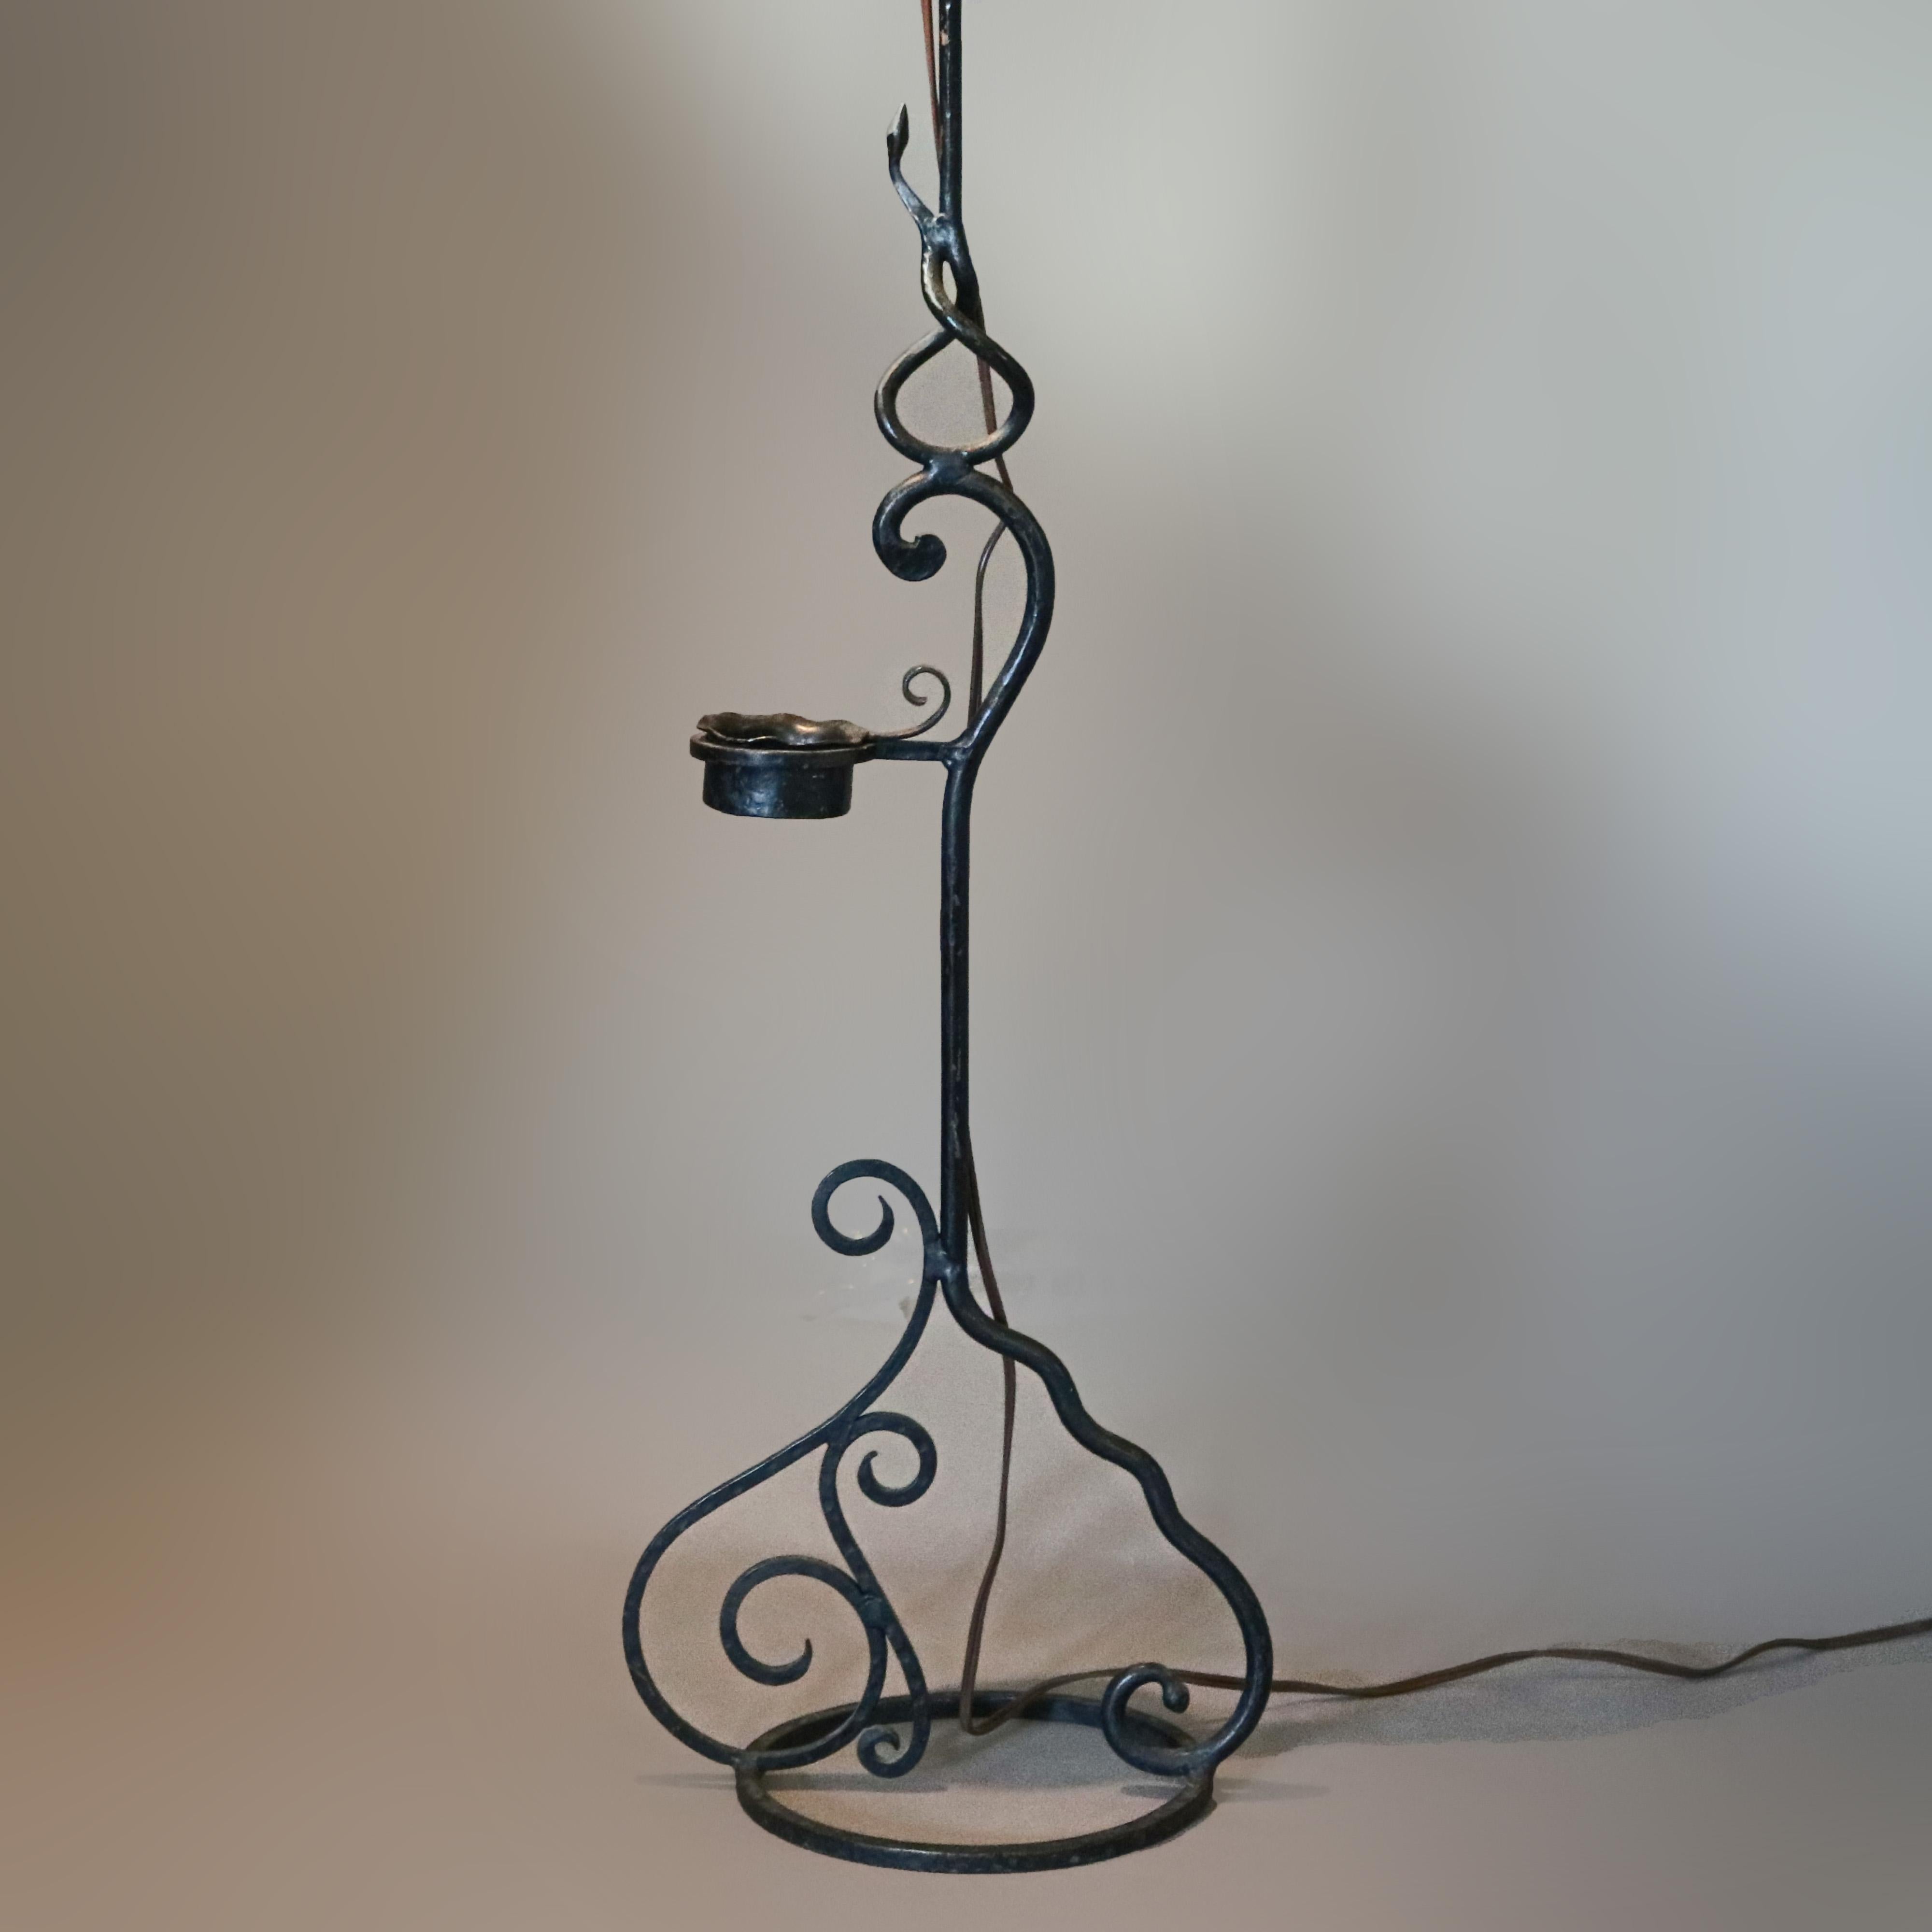 American Wrought Iron Goose Neck Floor Lamp with Art Glass Shade, circa 1920